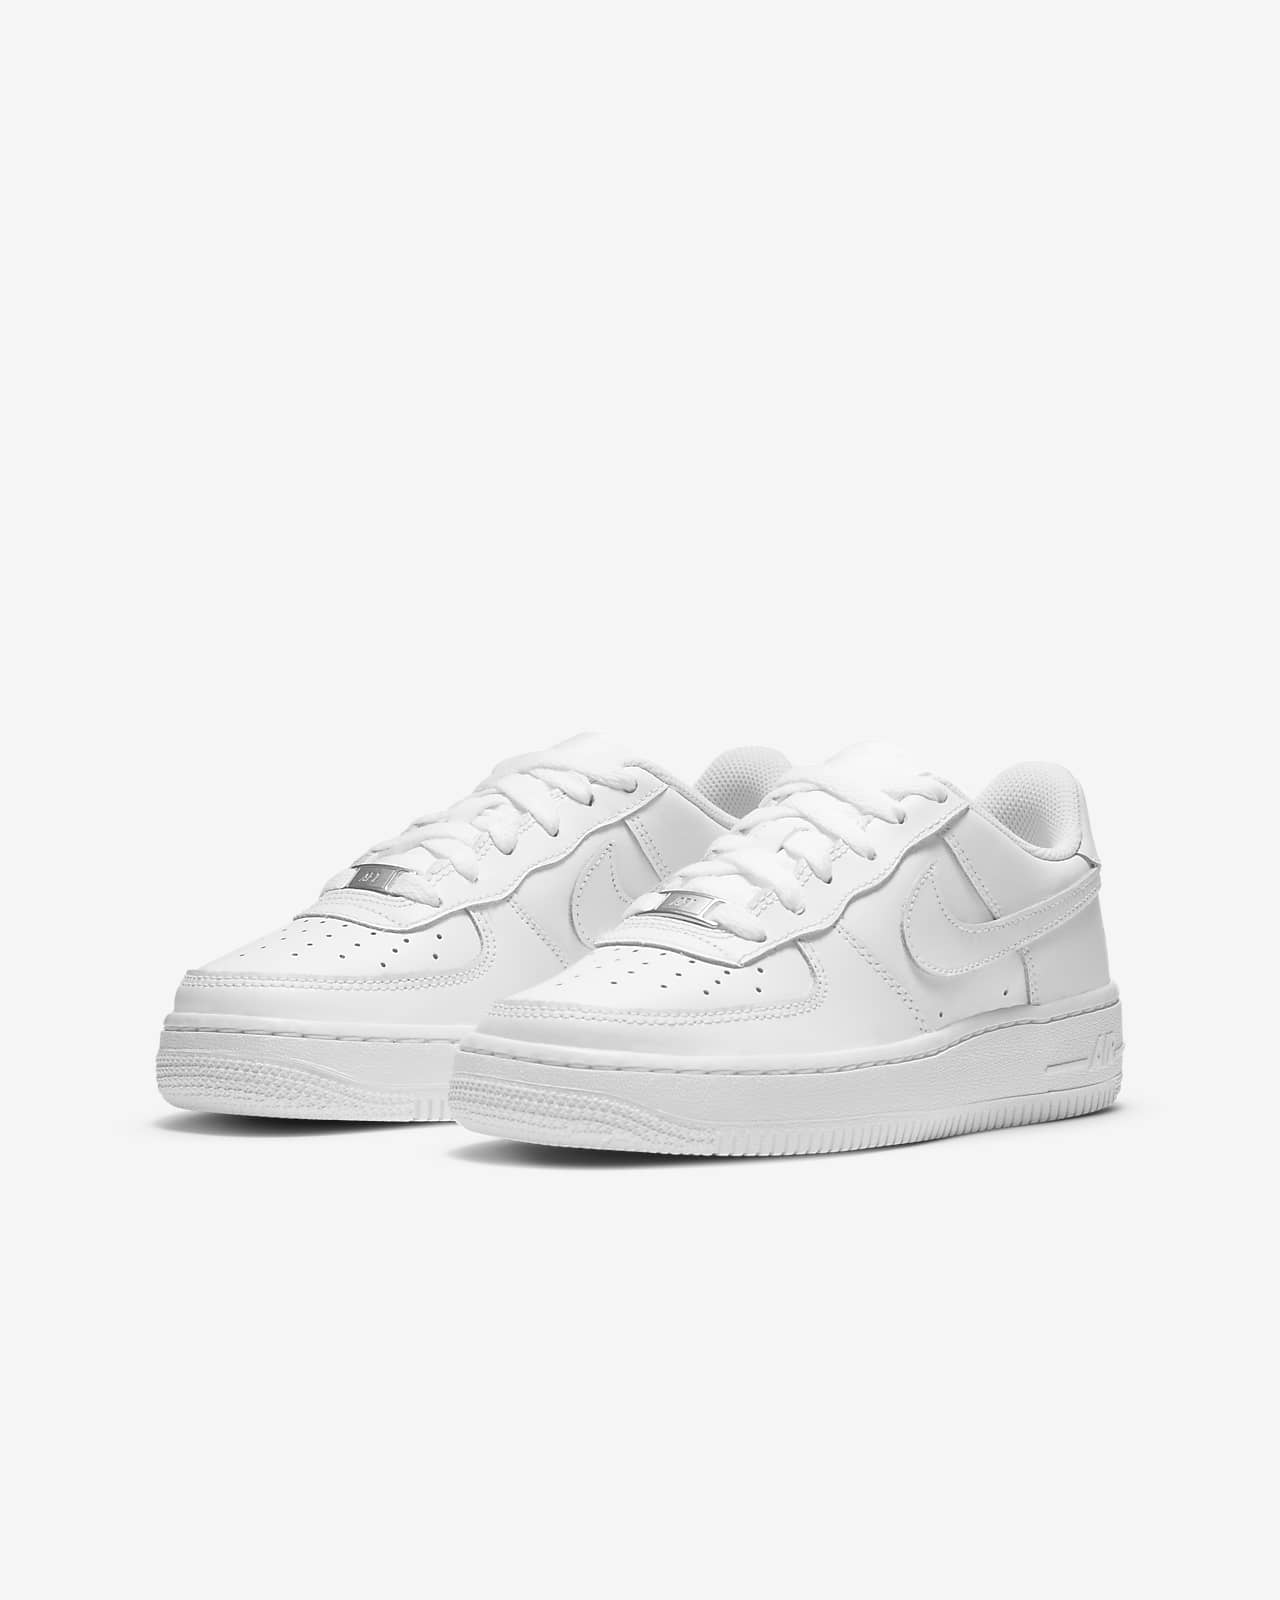 nike air force white junior size 6